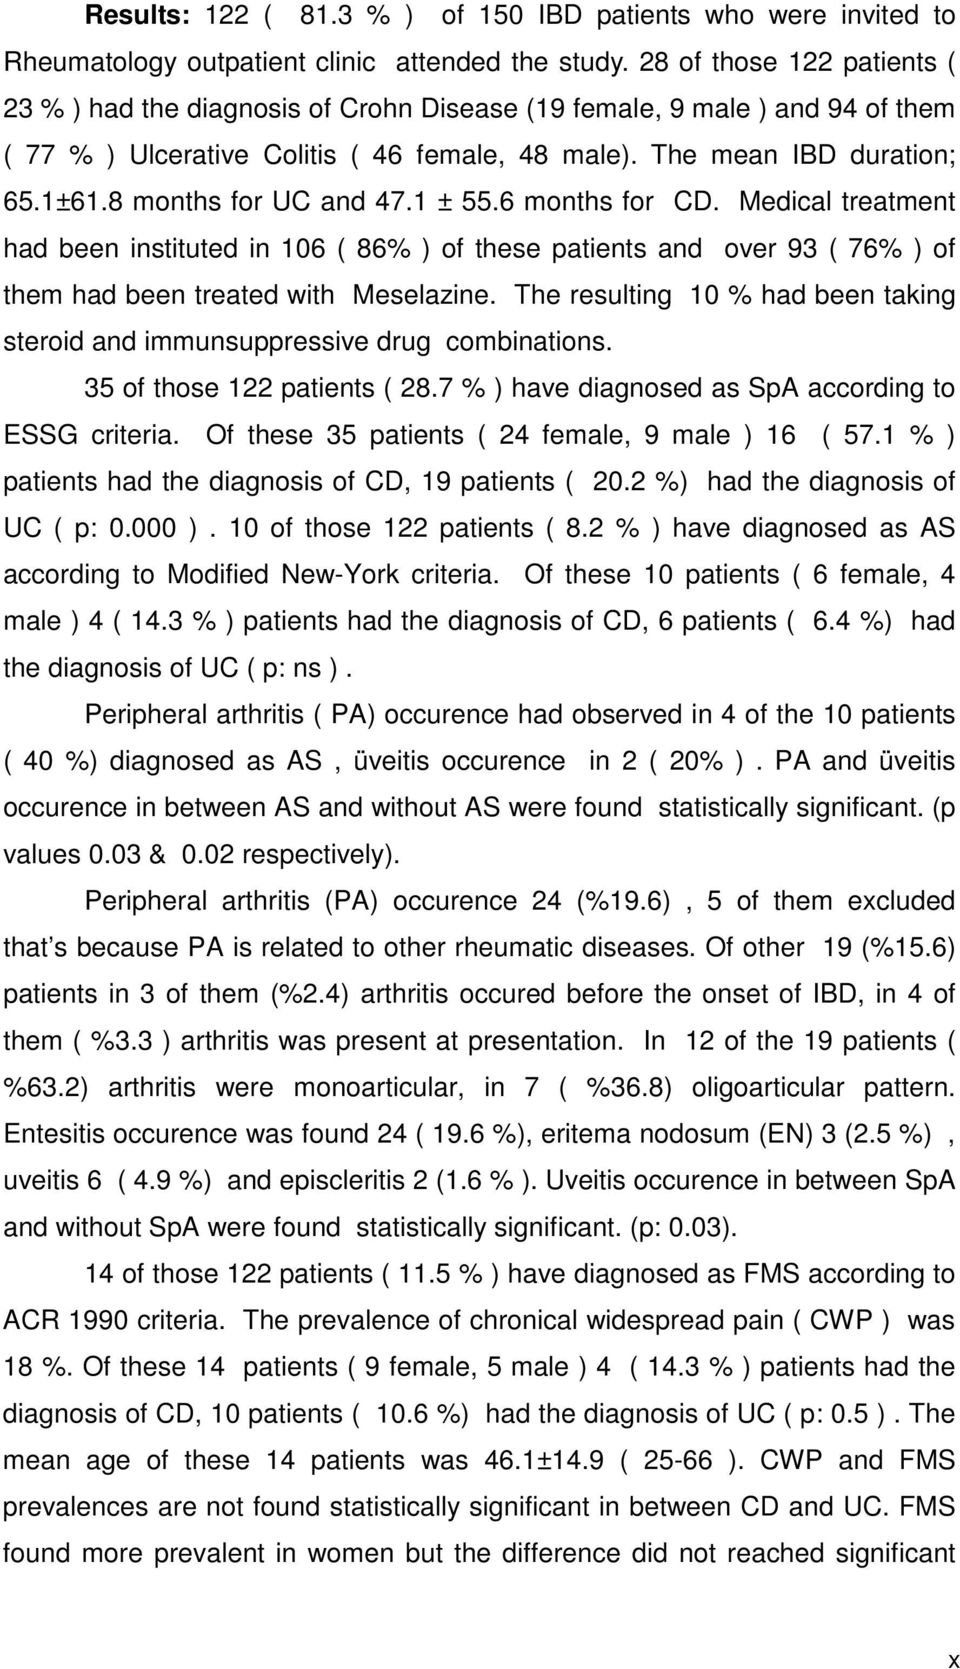 8 months for UC and 47.1 ± 55.6 months for CD. Medical treatment had been instituted in 106 ( 86% ) of these patients and over 93 ( 76% ) of them had been treated with Meselazine.